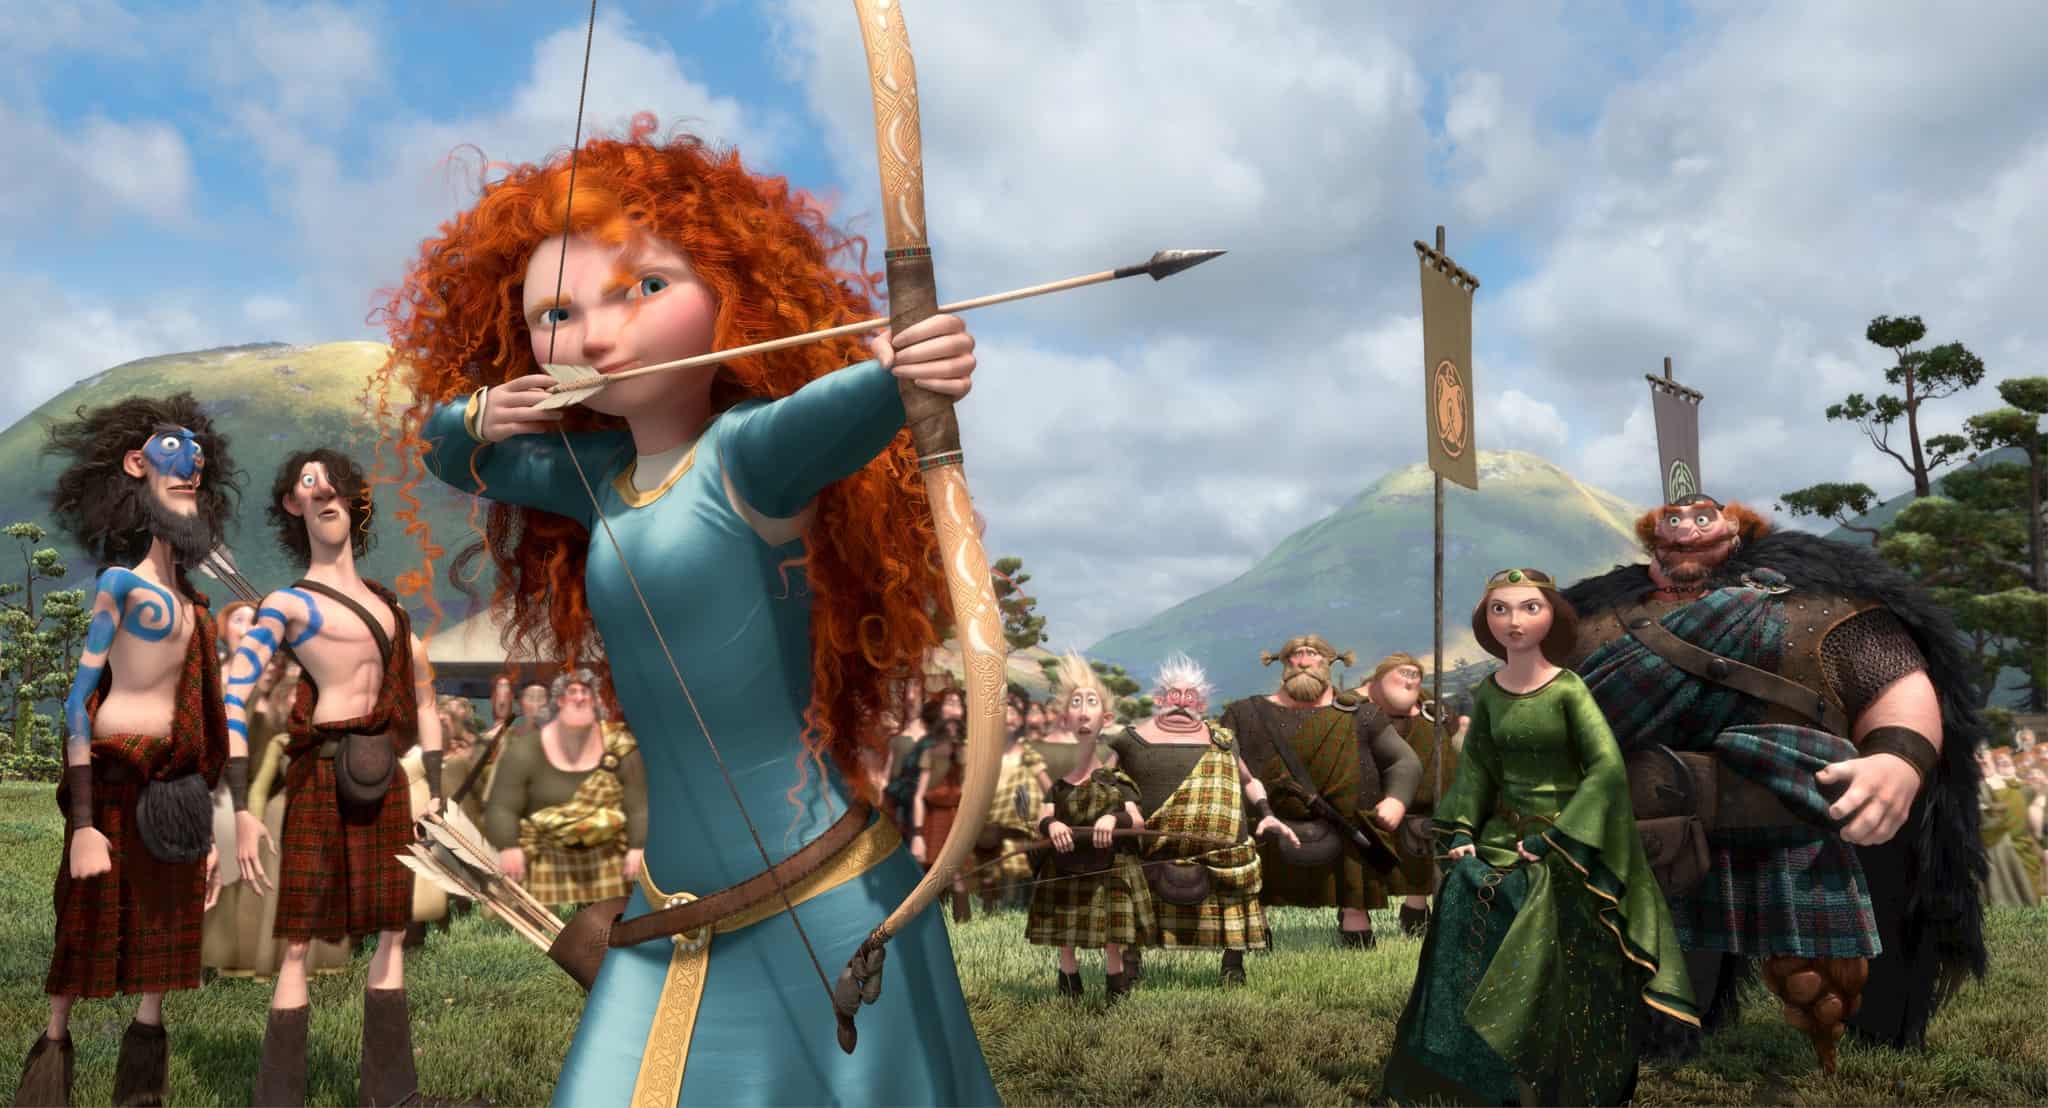 Merida shooting her bow in front of a crowd of onlookers